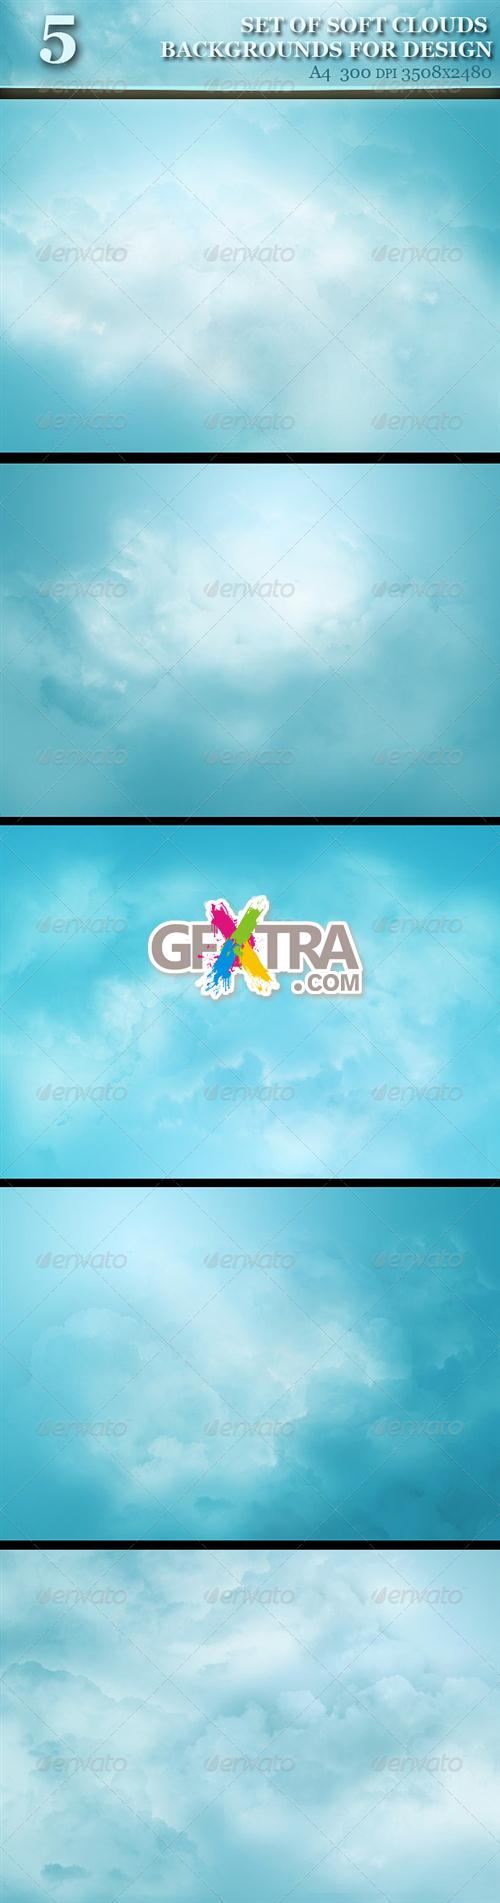 GraphicRiver - Set of Soft Clouds Backgrounds for Design.